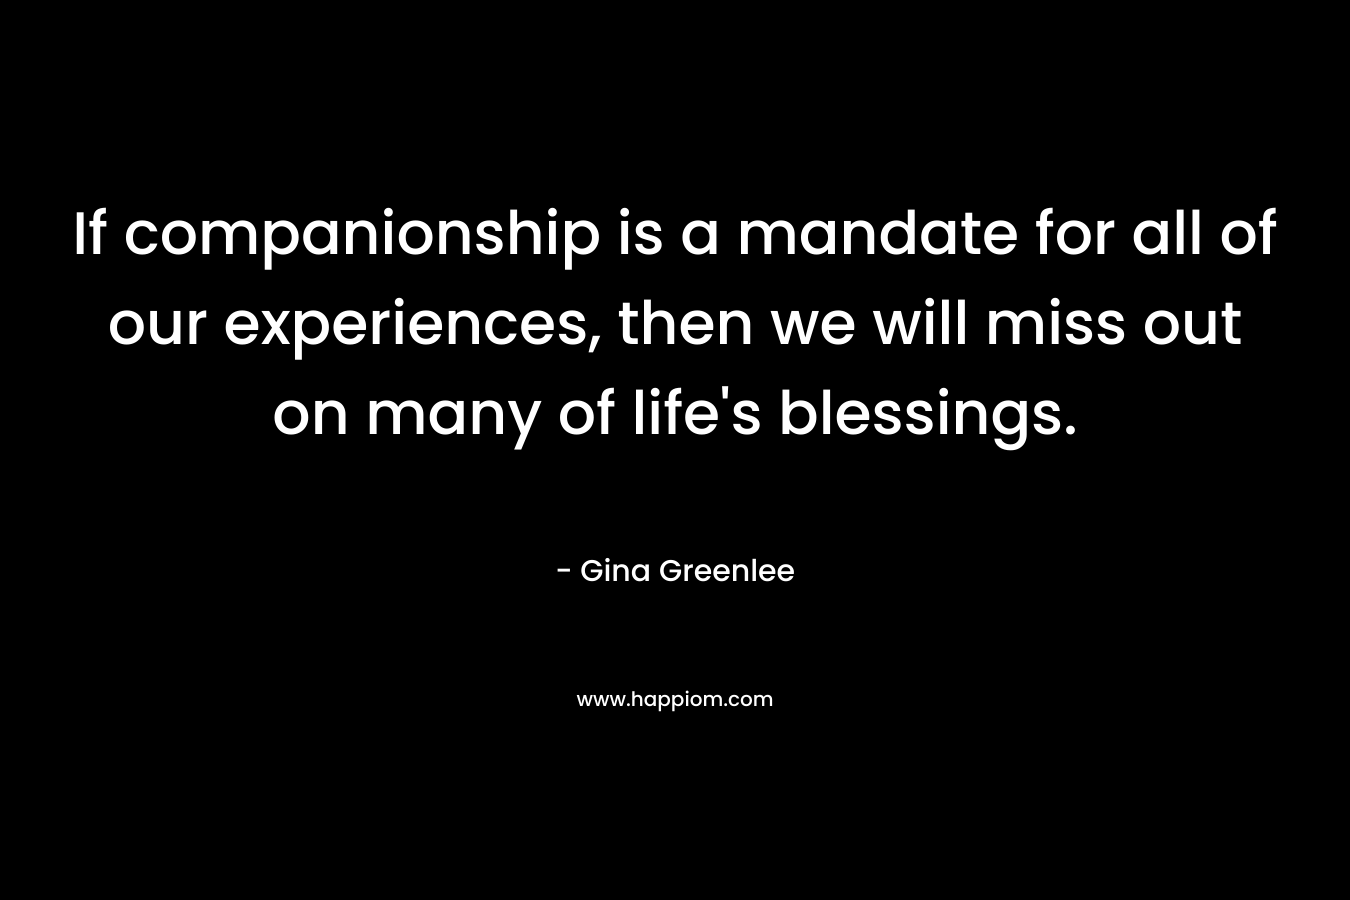 If companionship is a mandate for all of our experiences, then we will miss out on many of life's blessings.